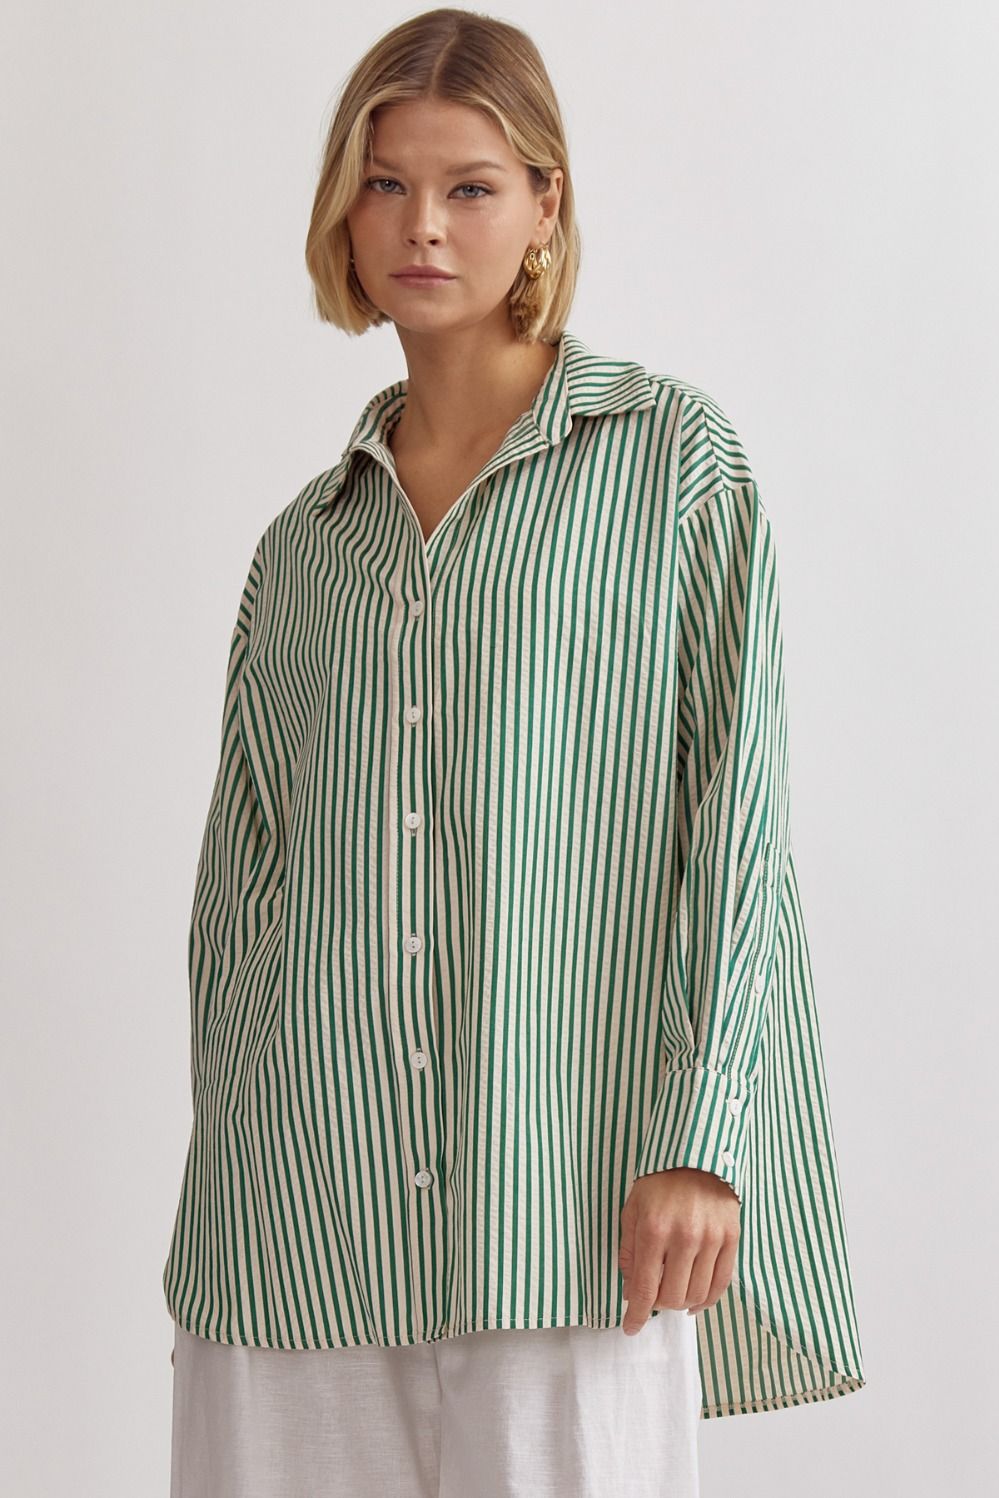 Dianna Classic Stripe Long Sleeve Collared Button Up Blouse - Green